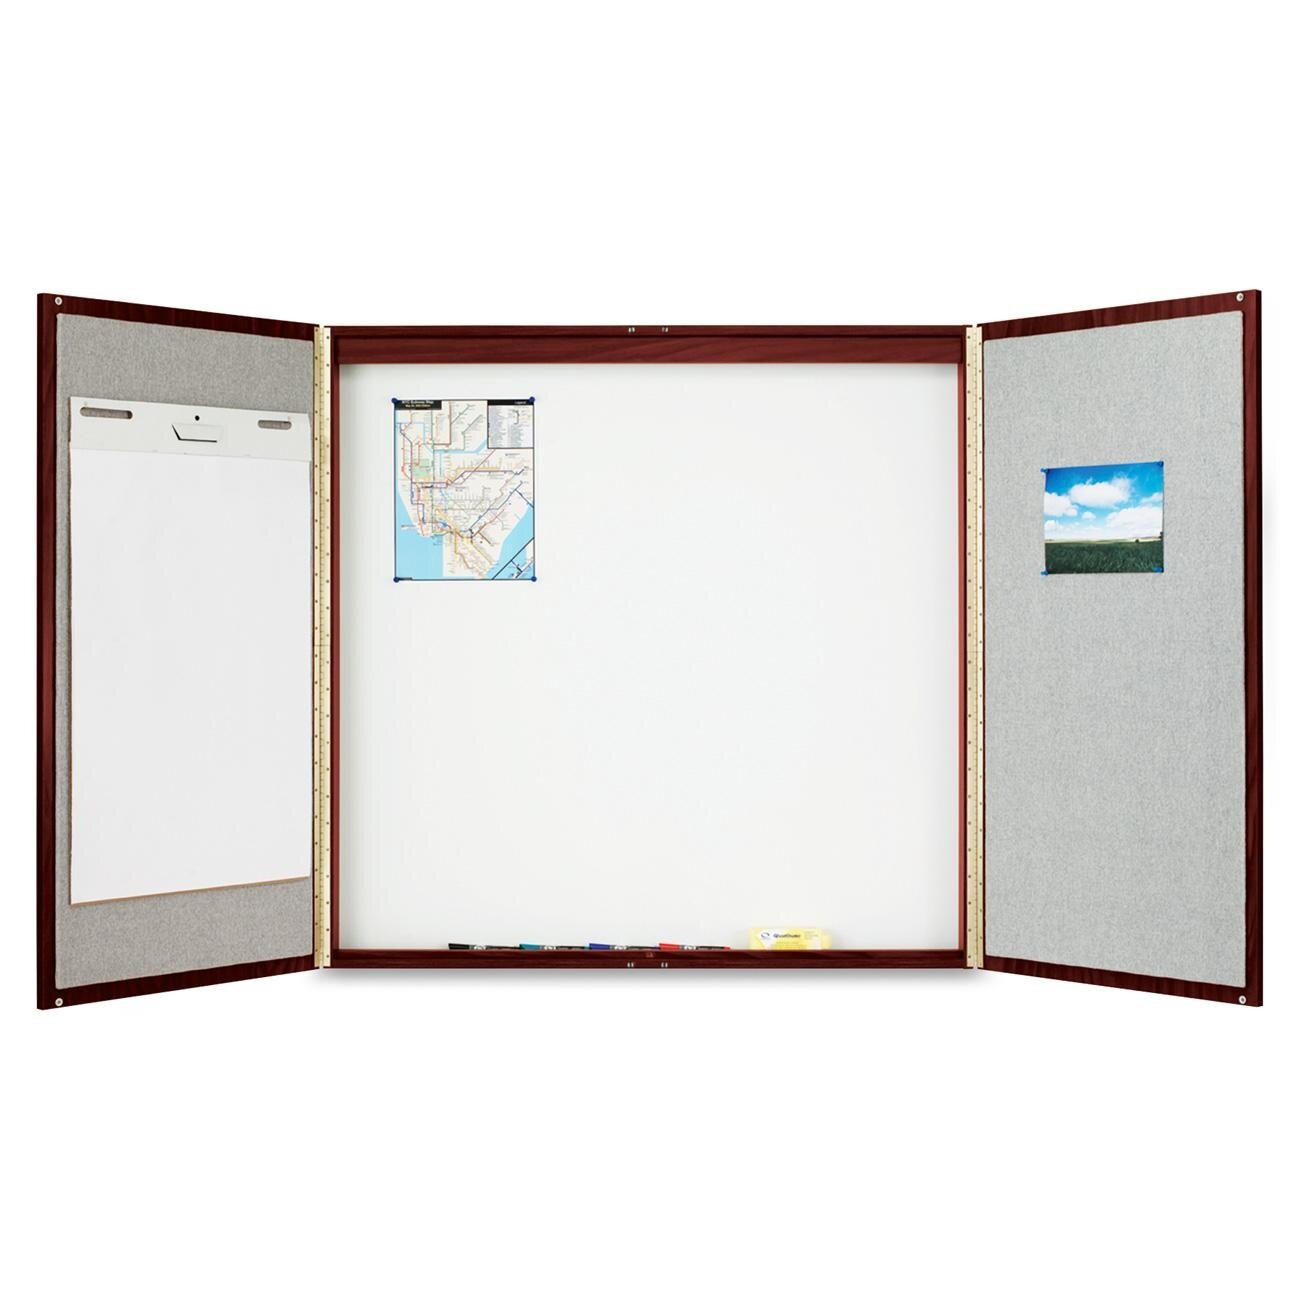 Quartet Conference Room Enclosed Cabinet Whiteboard 4 H X 4 W